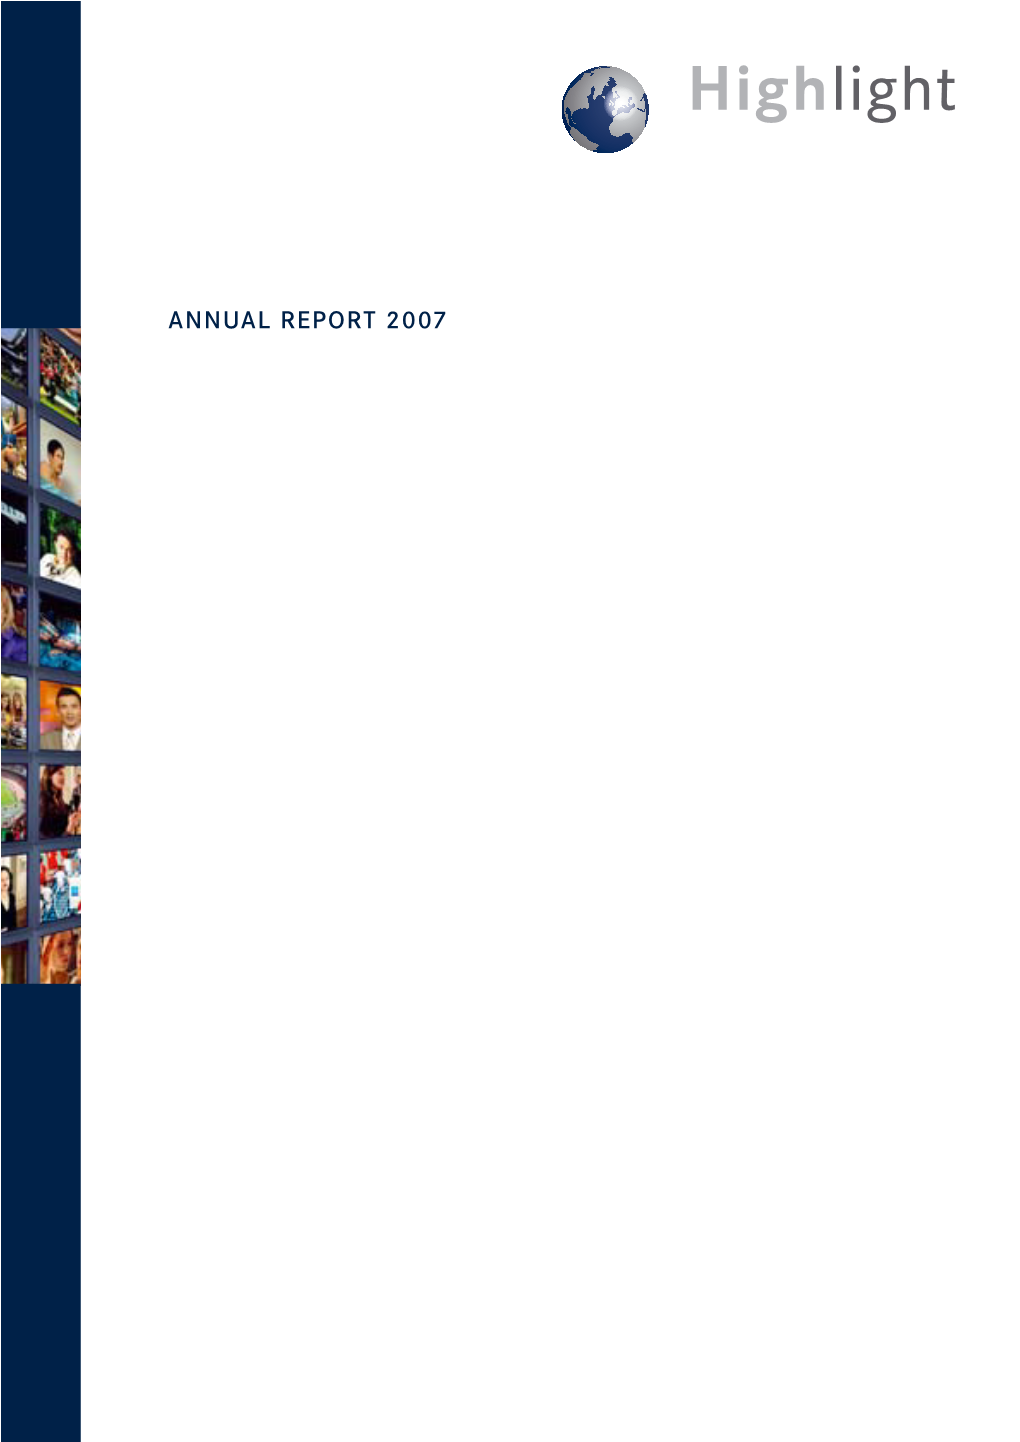 ANNUAL REPORT 2007 the Swiss Highlight Group Is One of the Largest Media Companies Listed on the German Stock Exchange